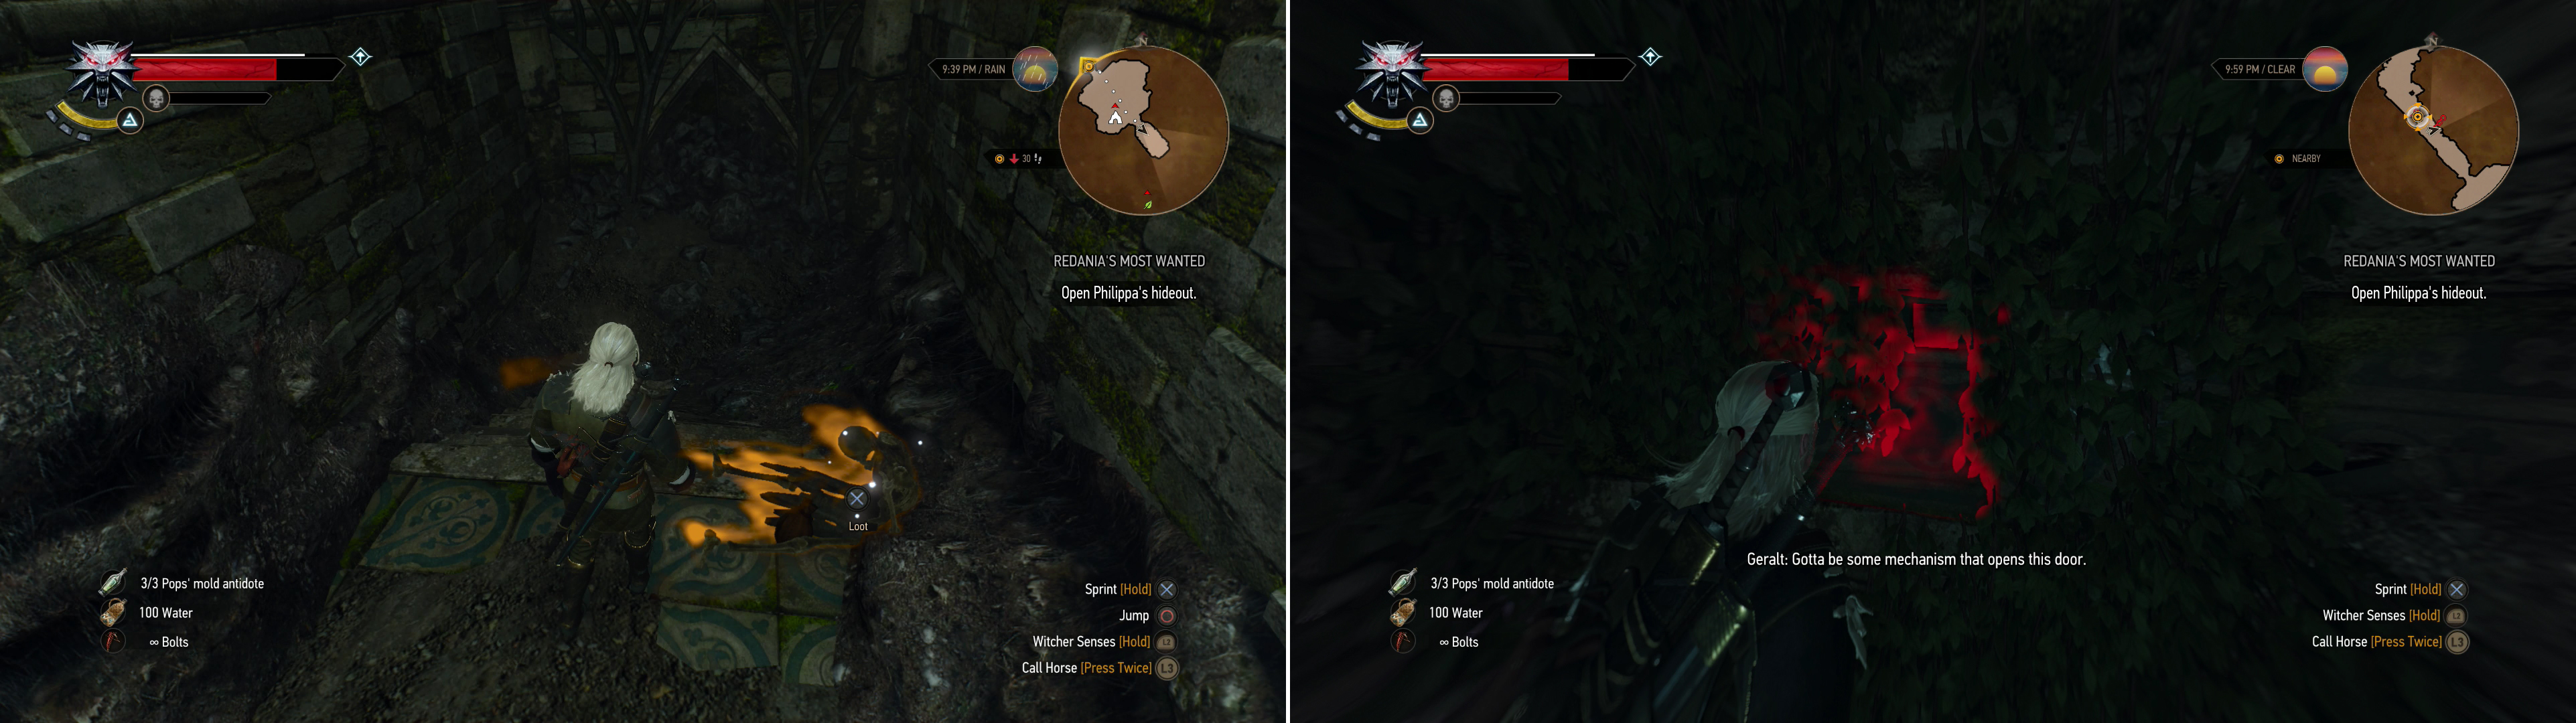 Loot the corpse behind the weak wall to find the Diagram: Feline Silver Sword (left), then use the key to disable the barrier protecting Phillipas hideout (right).